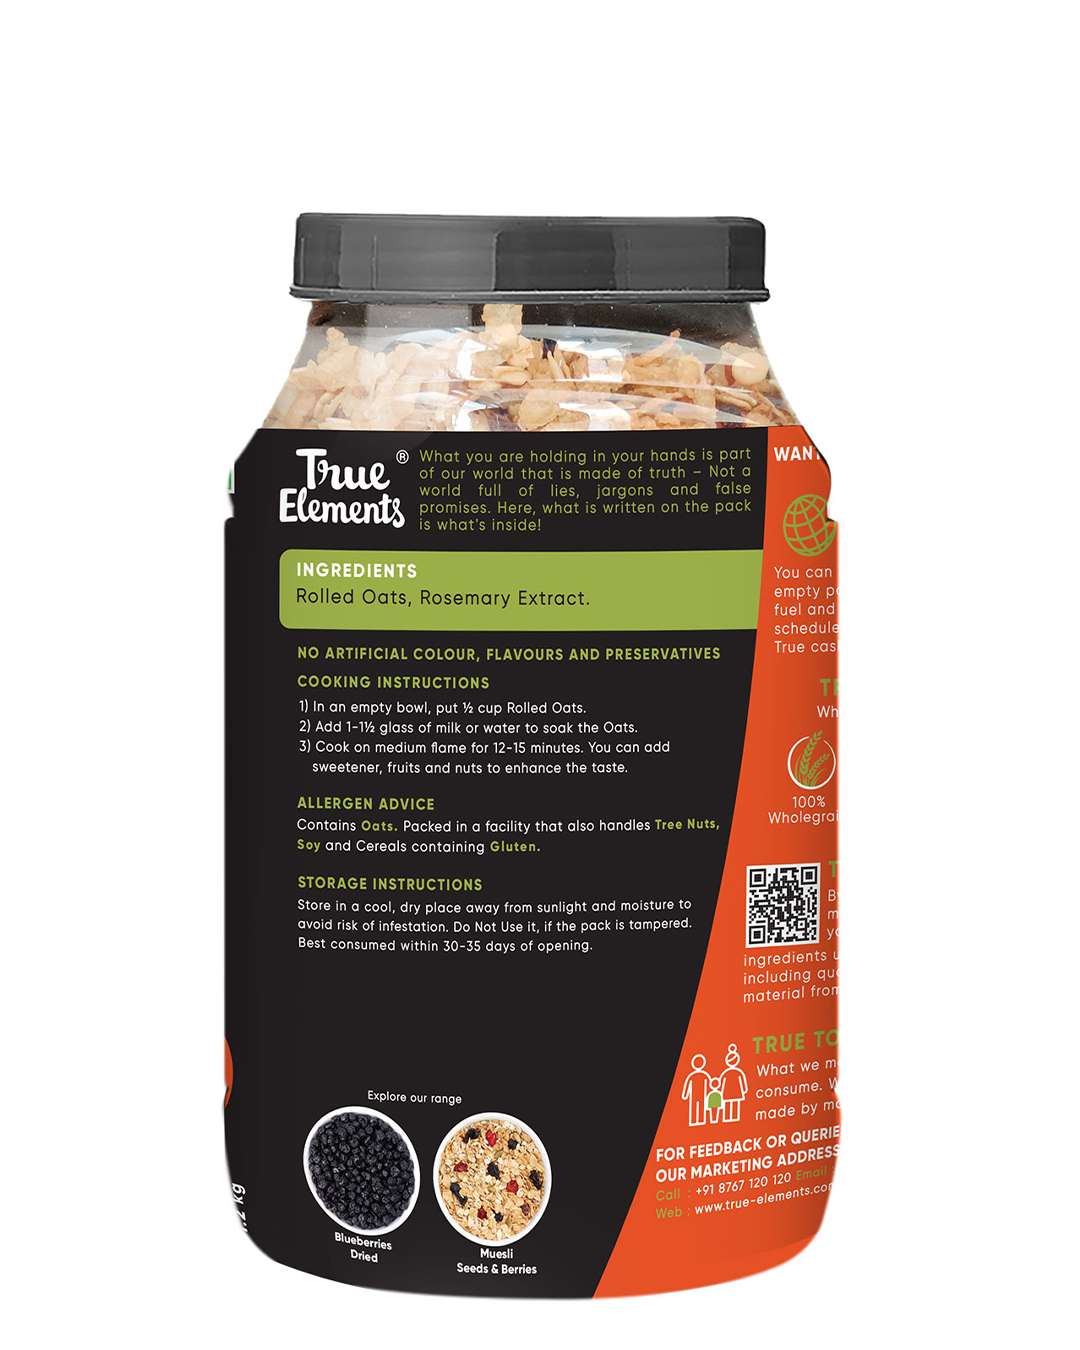 True Elements Rolled Oats Ingredients and Storage instructions